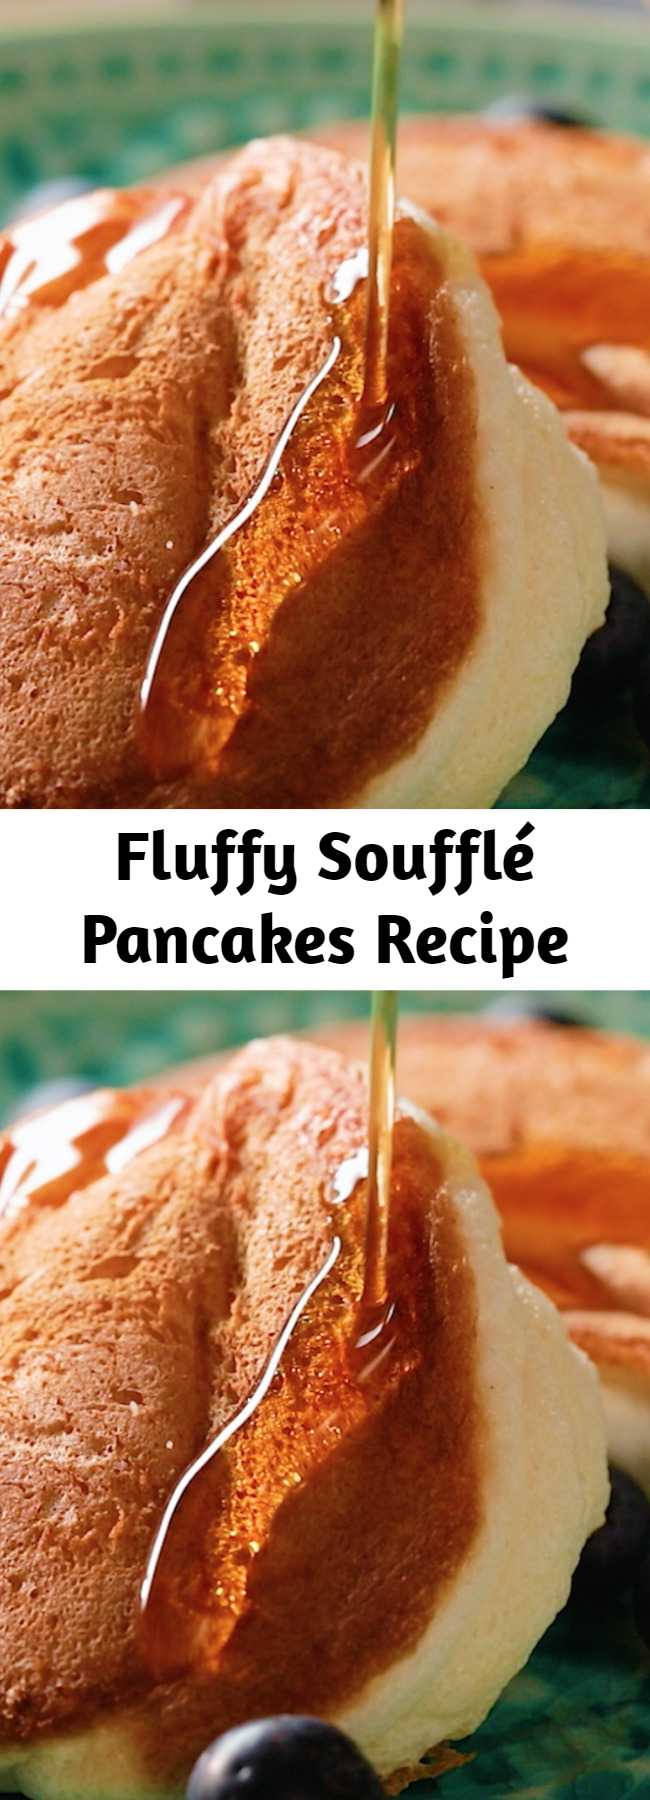 Fluffy Soufflé Pancakes Recipe - You've probably heard of Japanese pancakes. They're as fluffy as a cloud. We give you fluffy soufflé pancakes, a recipe you will never get over. Not only are they the tastiest, but they're also light as a feather! We won't blame you for topping them with bananas or strawberries.